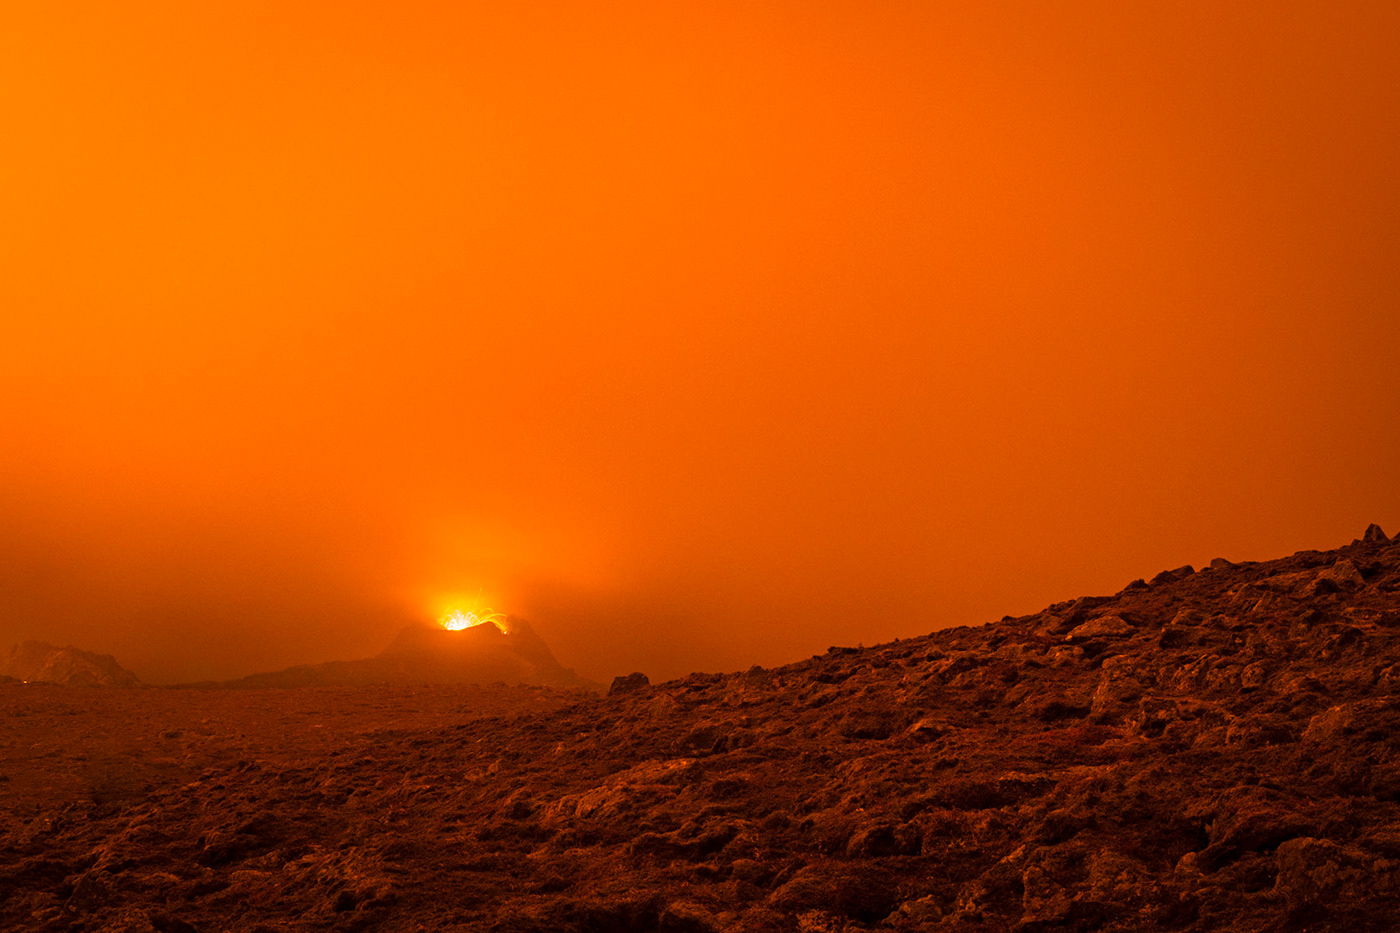 The nightly lava dips the landscape in an extraterrestrial orange